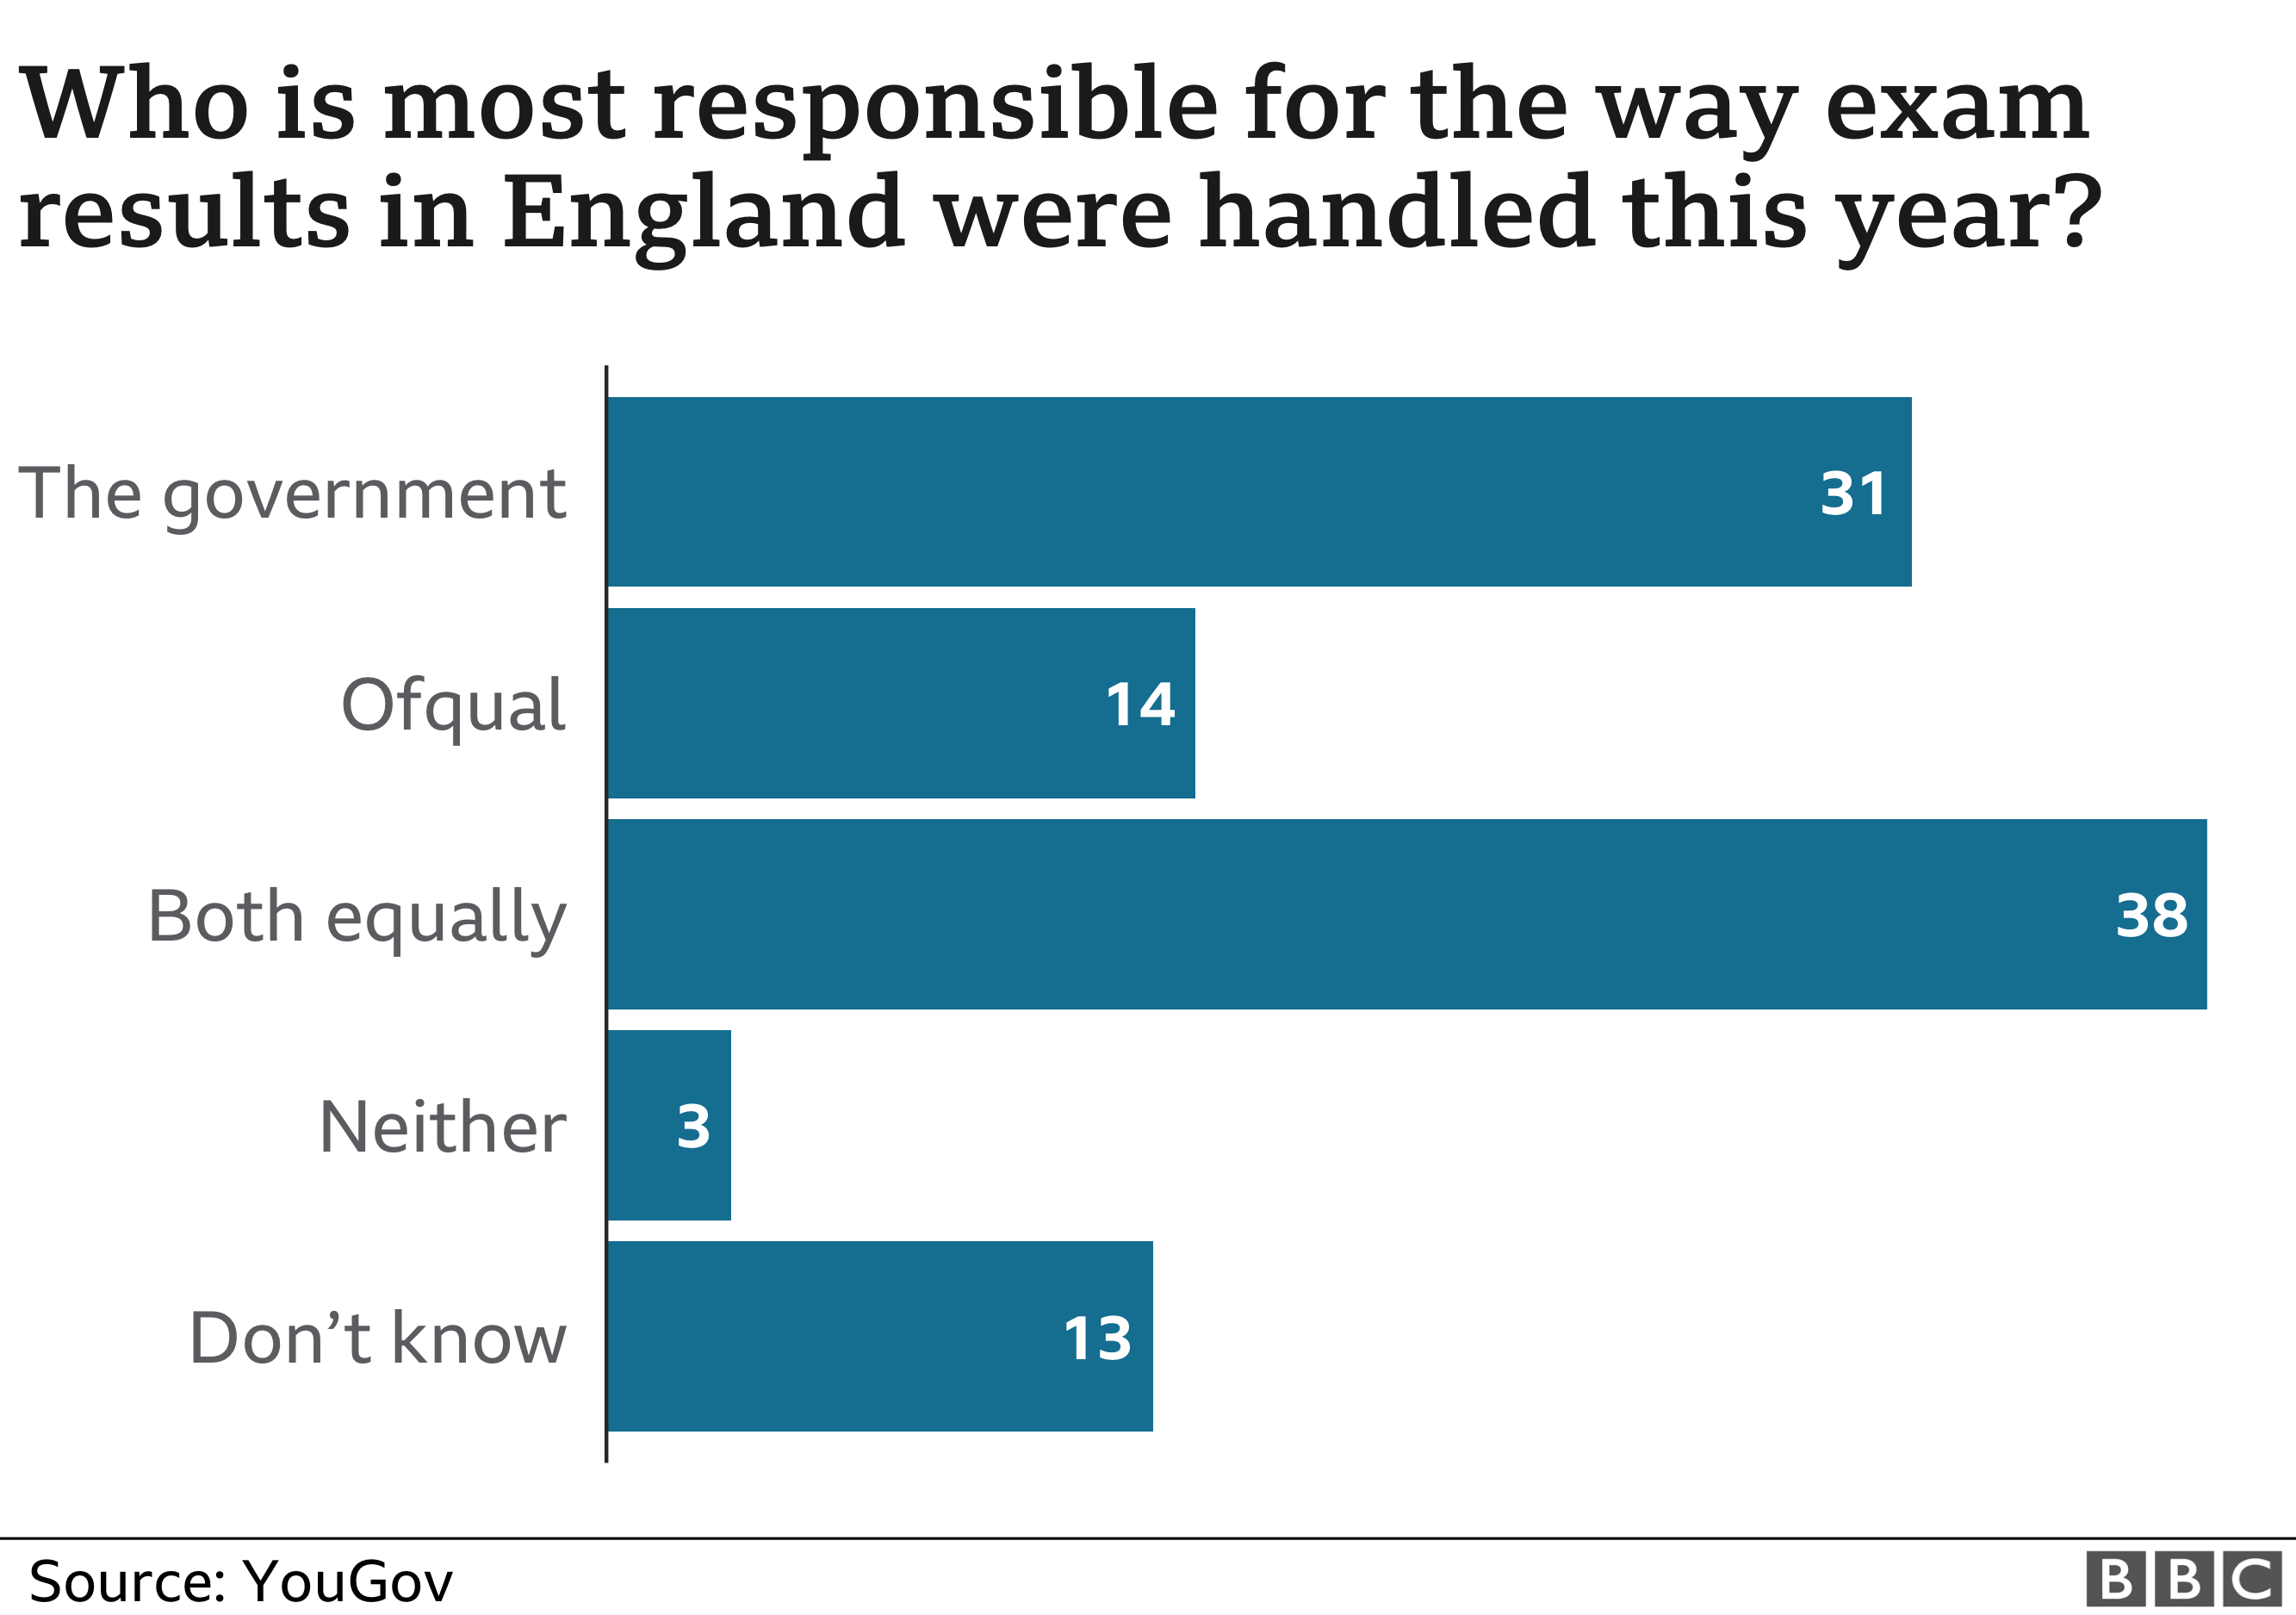 Who is responsible for the way exam results in England were handled this year?